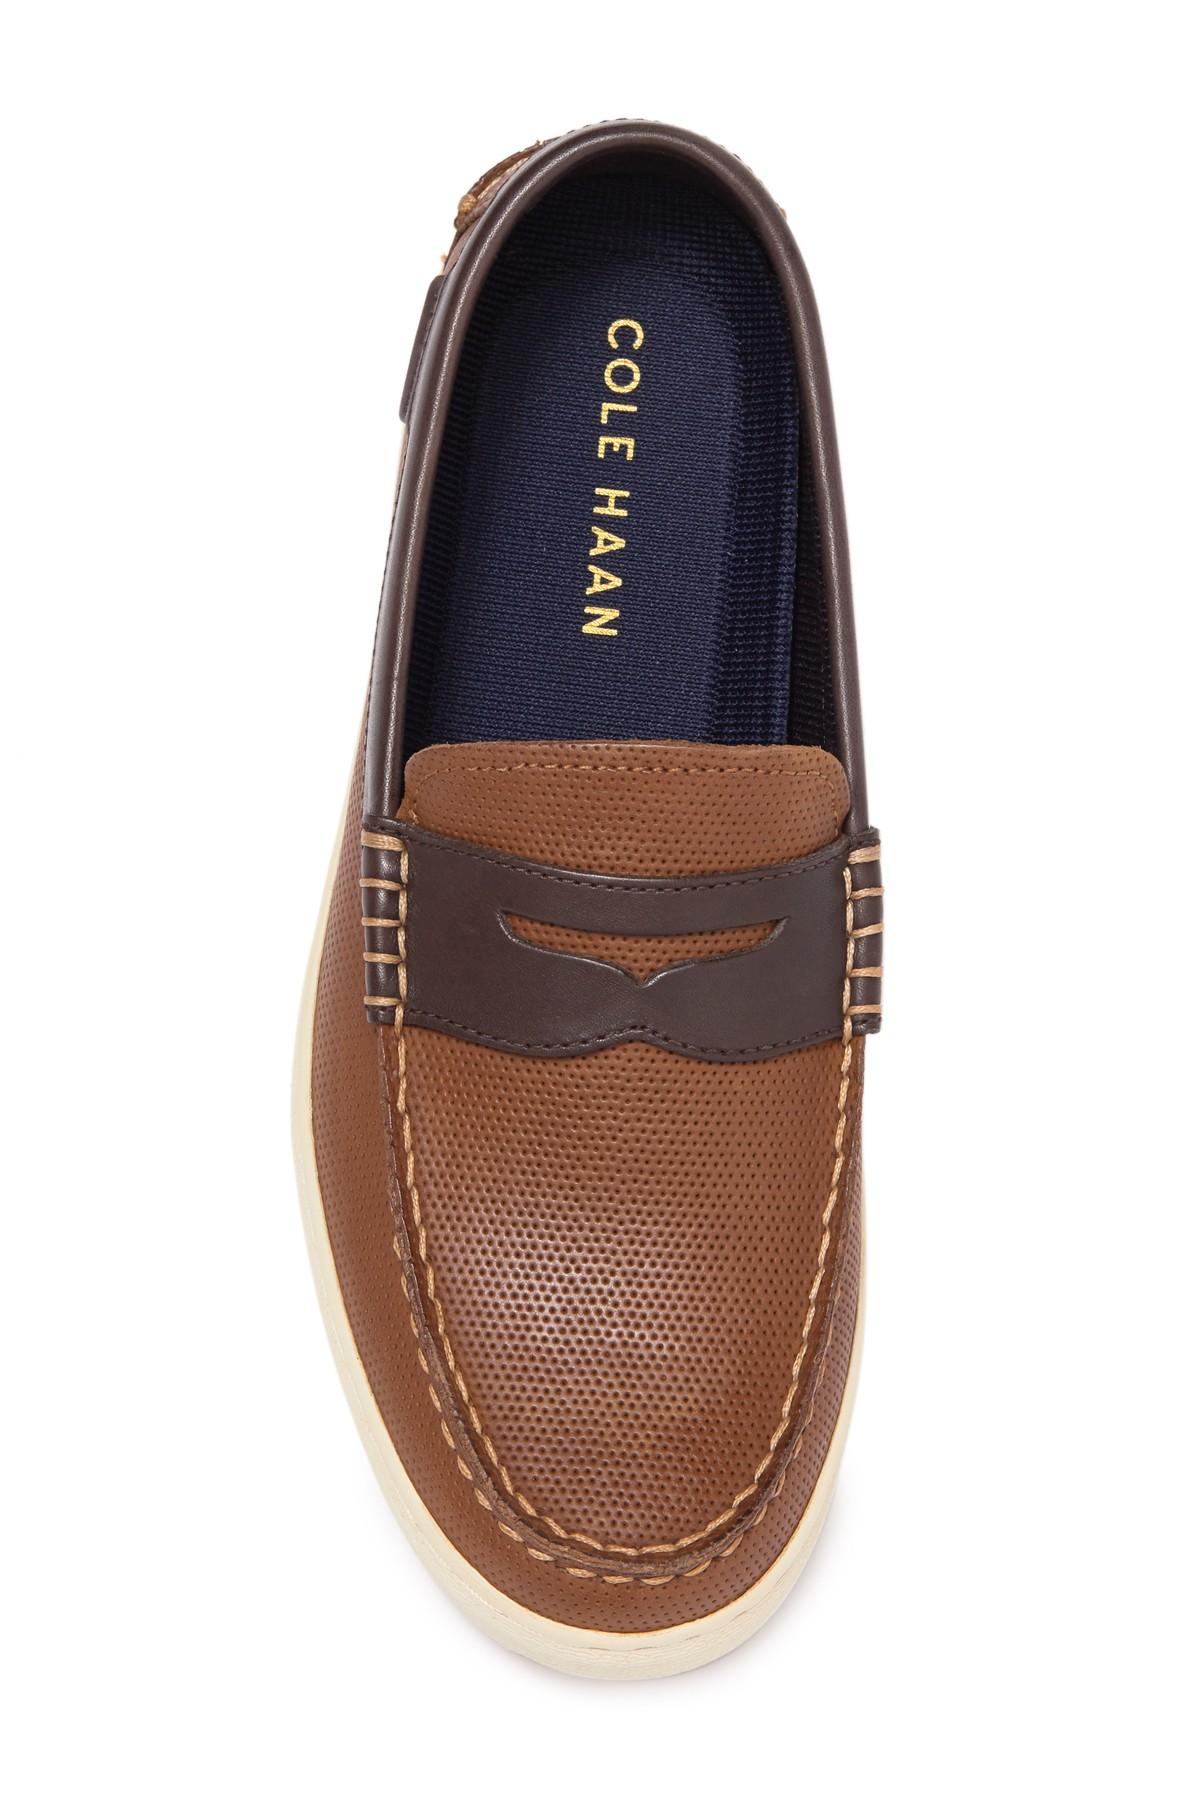 Cole Haan Nantucket Ii Leather Loafer in Brown for Men - Lyst